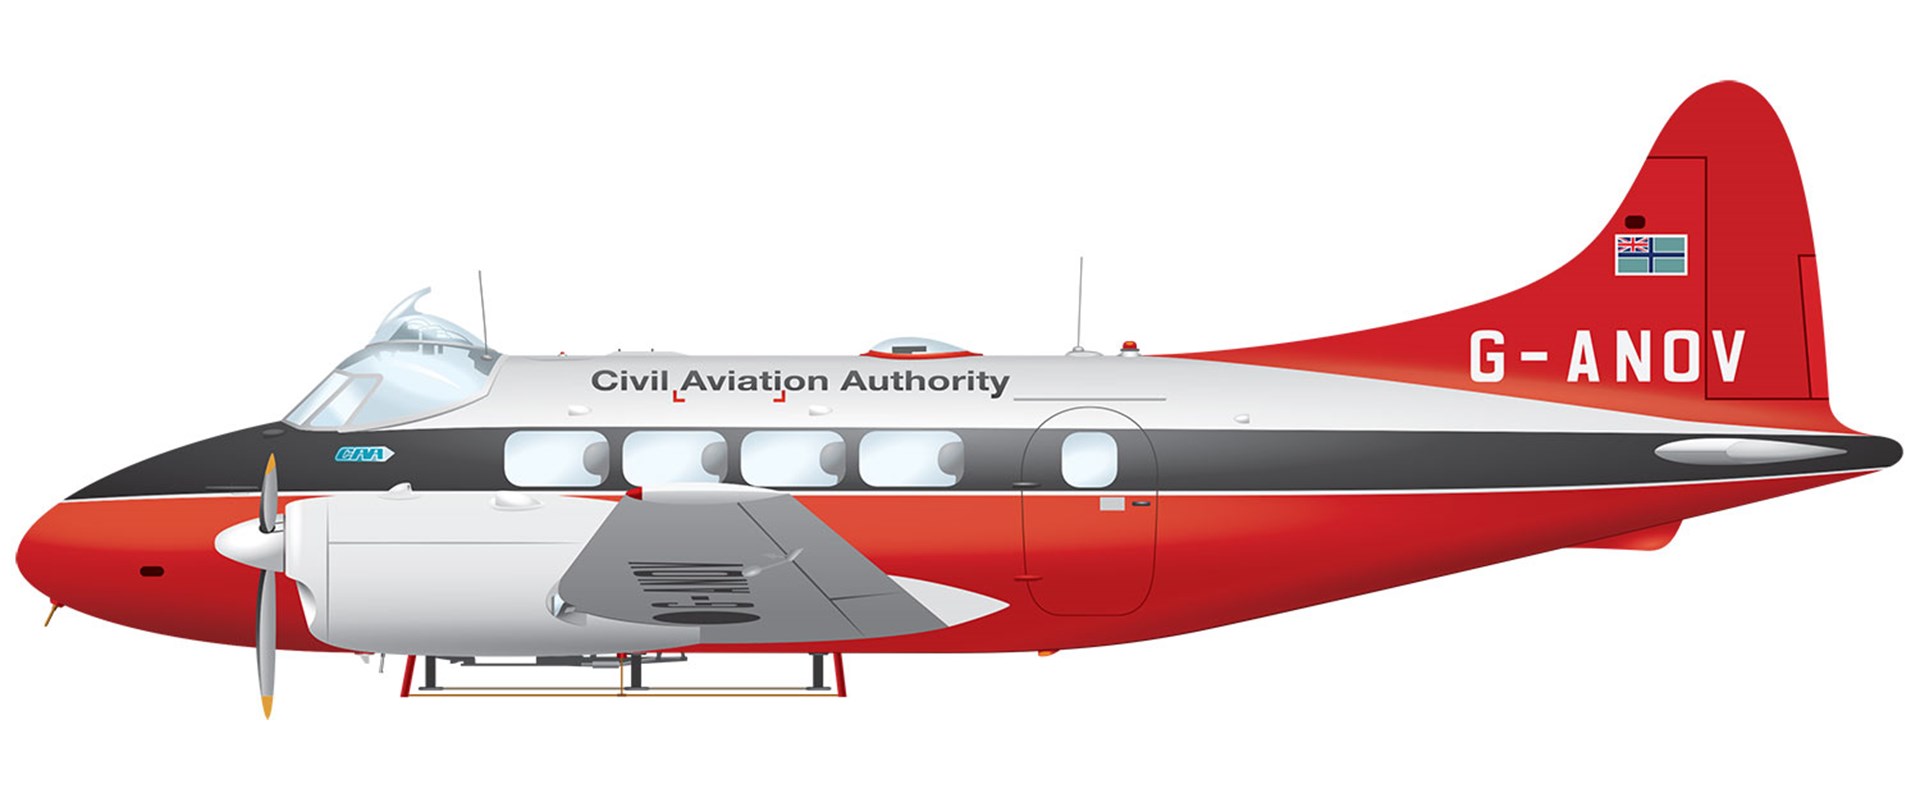 de Havilland Dove aircraft with white, black, and red stripes.